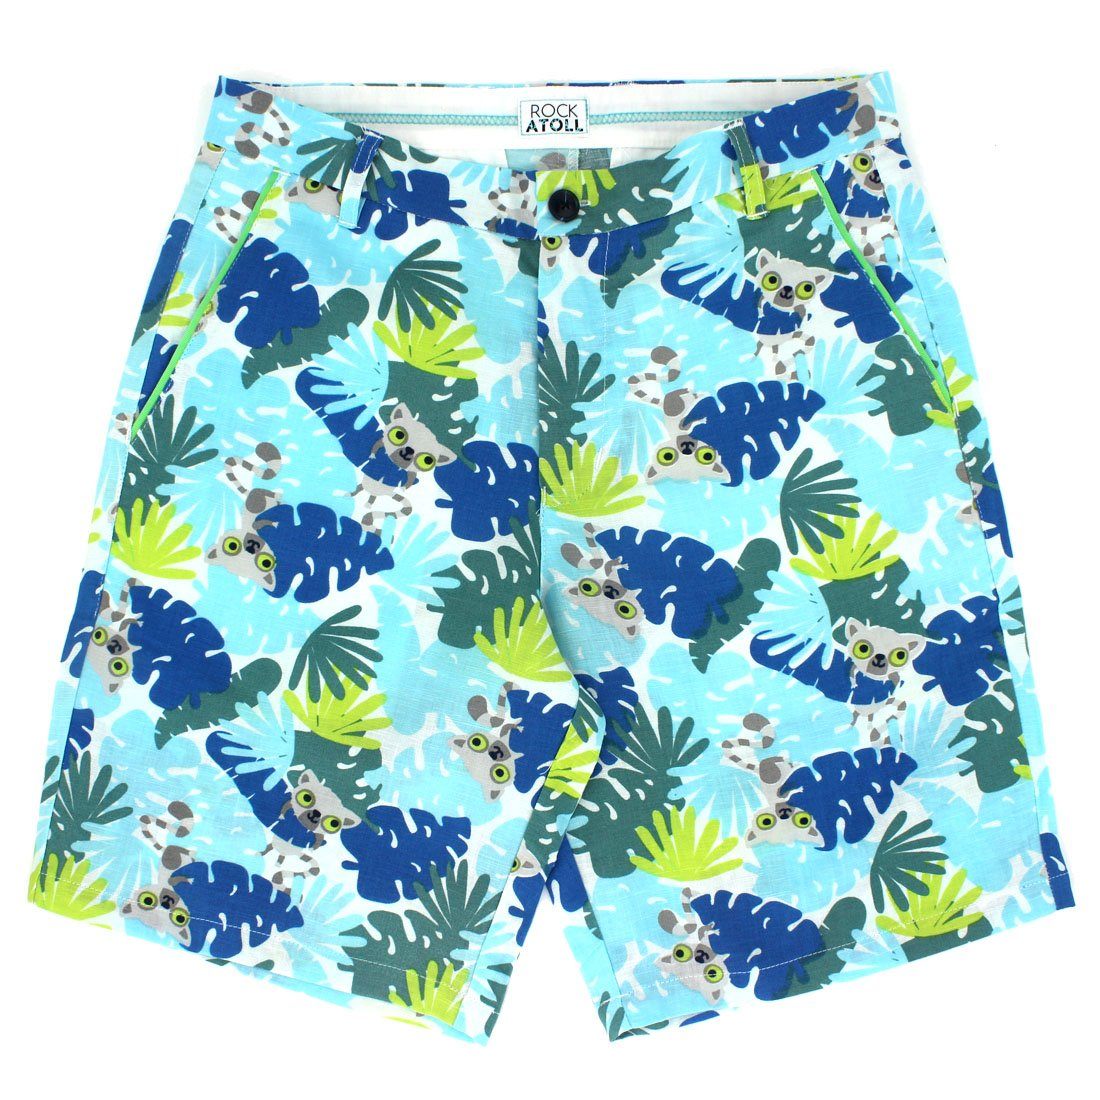 Lemurs and Palm Trees All Over Print Men's Shorts